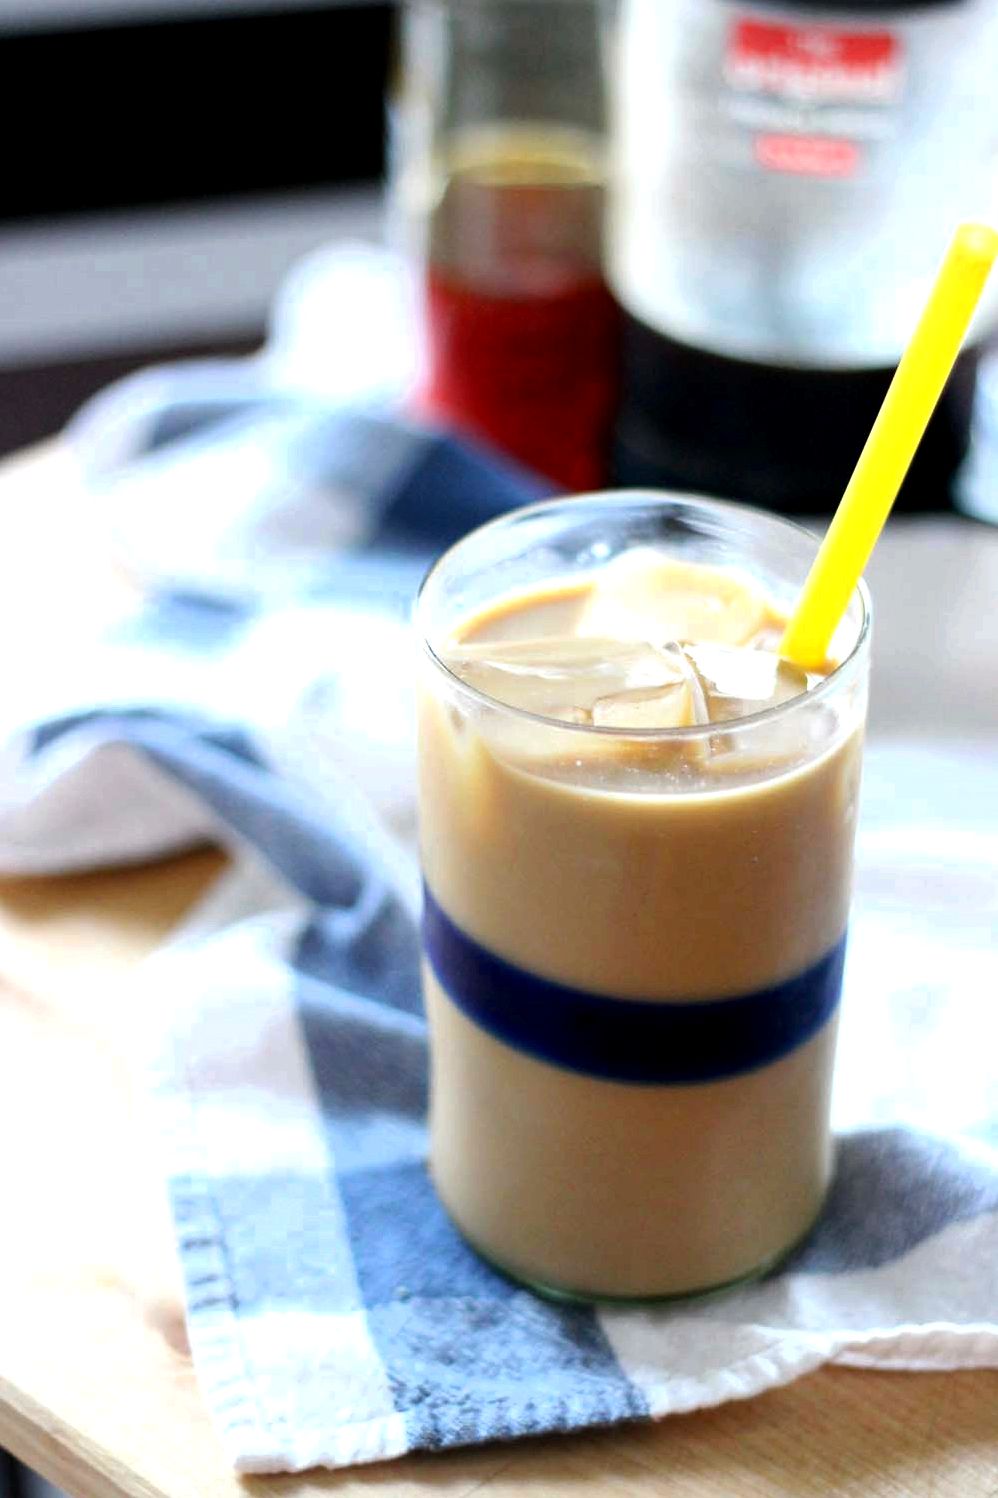 Cold brewed iced coffee is smooth, delicious, and bold. And when whole milk and honey are added, you have a delicious, refreshing treat that' /></p>
<p>Inside a French press, you mix coffee grounds directly with water (cold or hot). Then after allowing the causes to steep for some time, just like tea, you push the top press lower, that is covered inside a mesh sieve. The coffee comes with the sieve and also the grounds are pressed lower, departing you using the smoothest bold coffee ever!</p>
<p>To create cold brew iced coffee, simply mix cold water and enough coffee grounds together and permit to sit down within the refrigerator not less than 12 hrs. You would like more grounds than normal because you’re making an espresso concentrate that’s more powerful than your average coffee. When you’re prepared to serve, if utilizing a French press, just press the causes lower and you’re done! Should you mixed water and grounds inside a container or jar, simply strain the coffee utilizing a capable sieve, cheesecloth, or perhaps a coffee filter into another vessel. </p>
<p><img decoding=